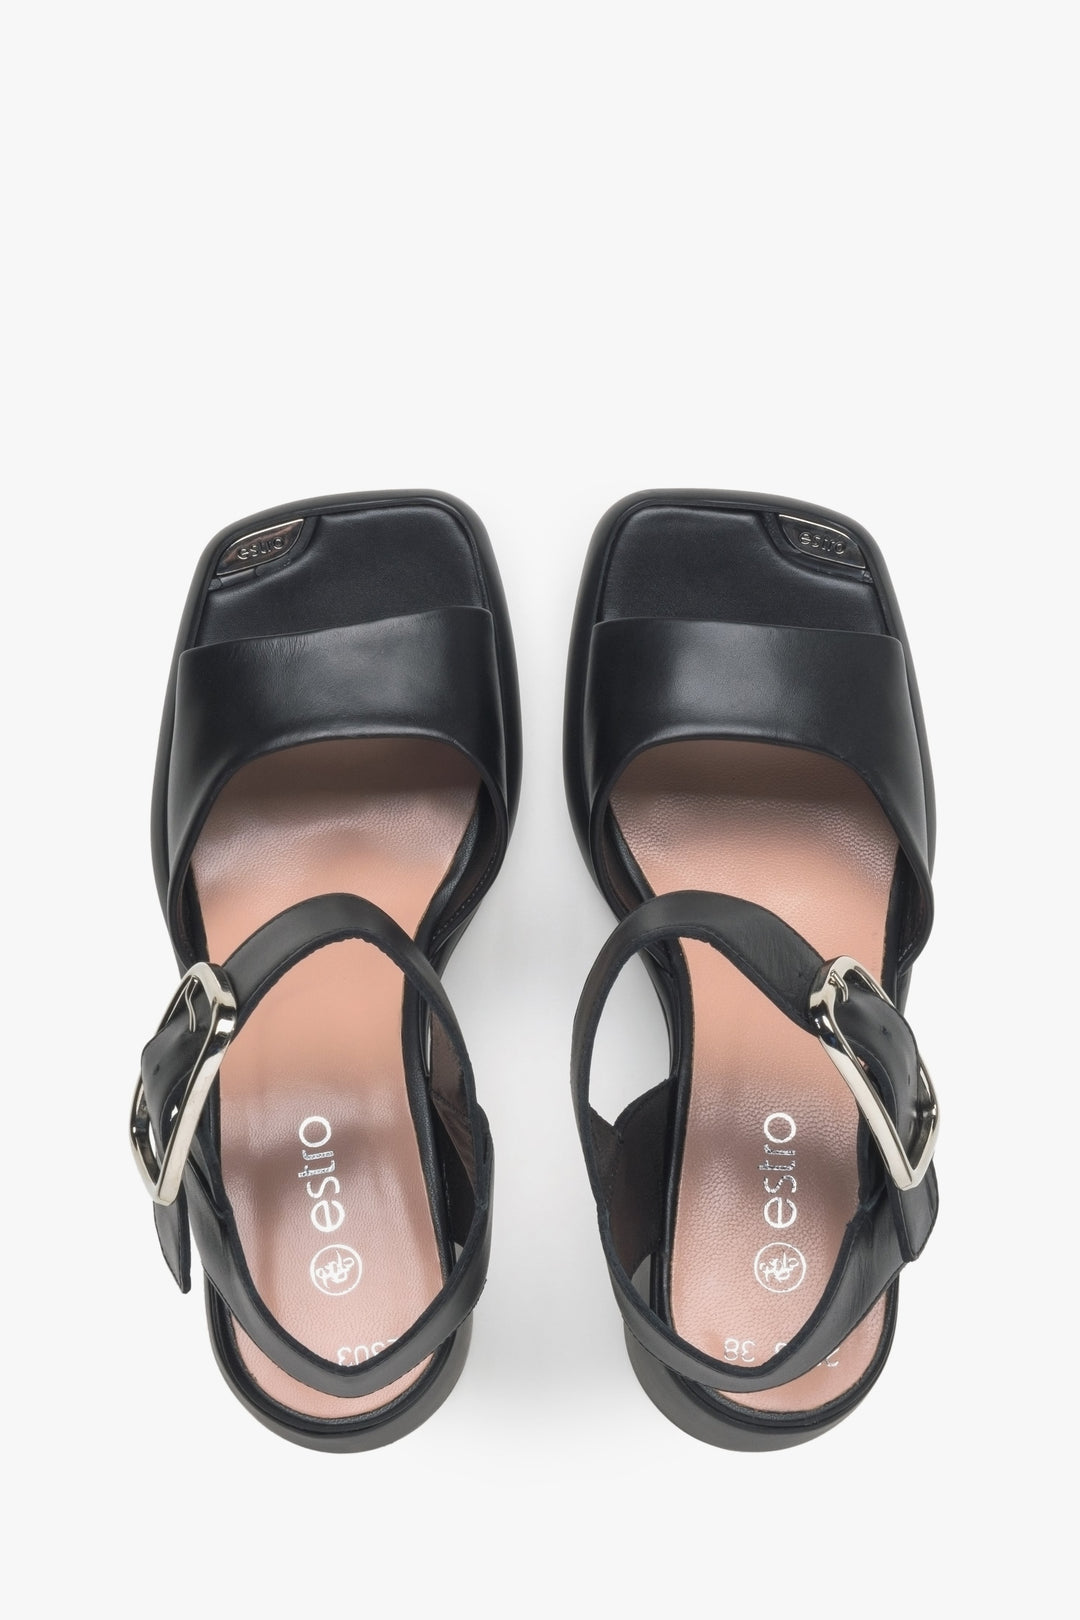 Women's black Estro sandals made of genuine leather - top view presentation of the model.